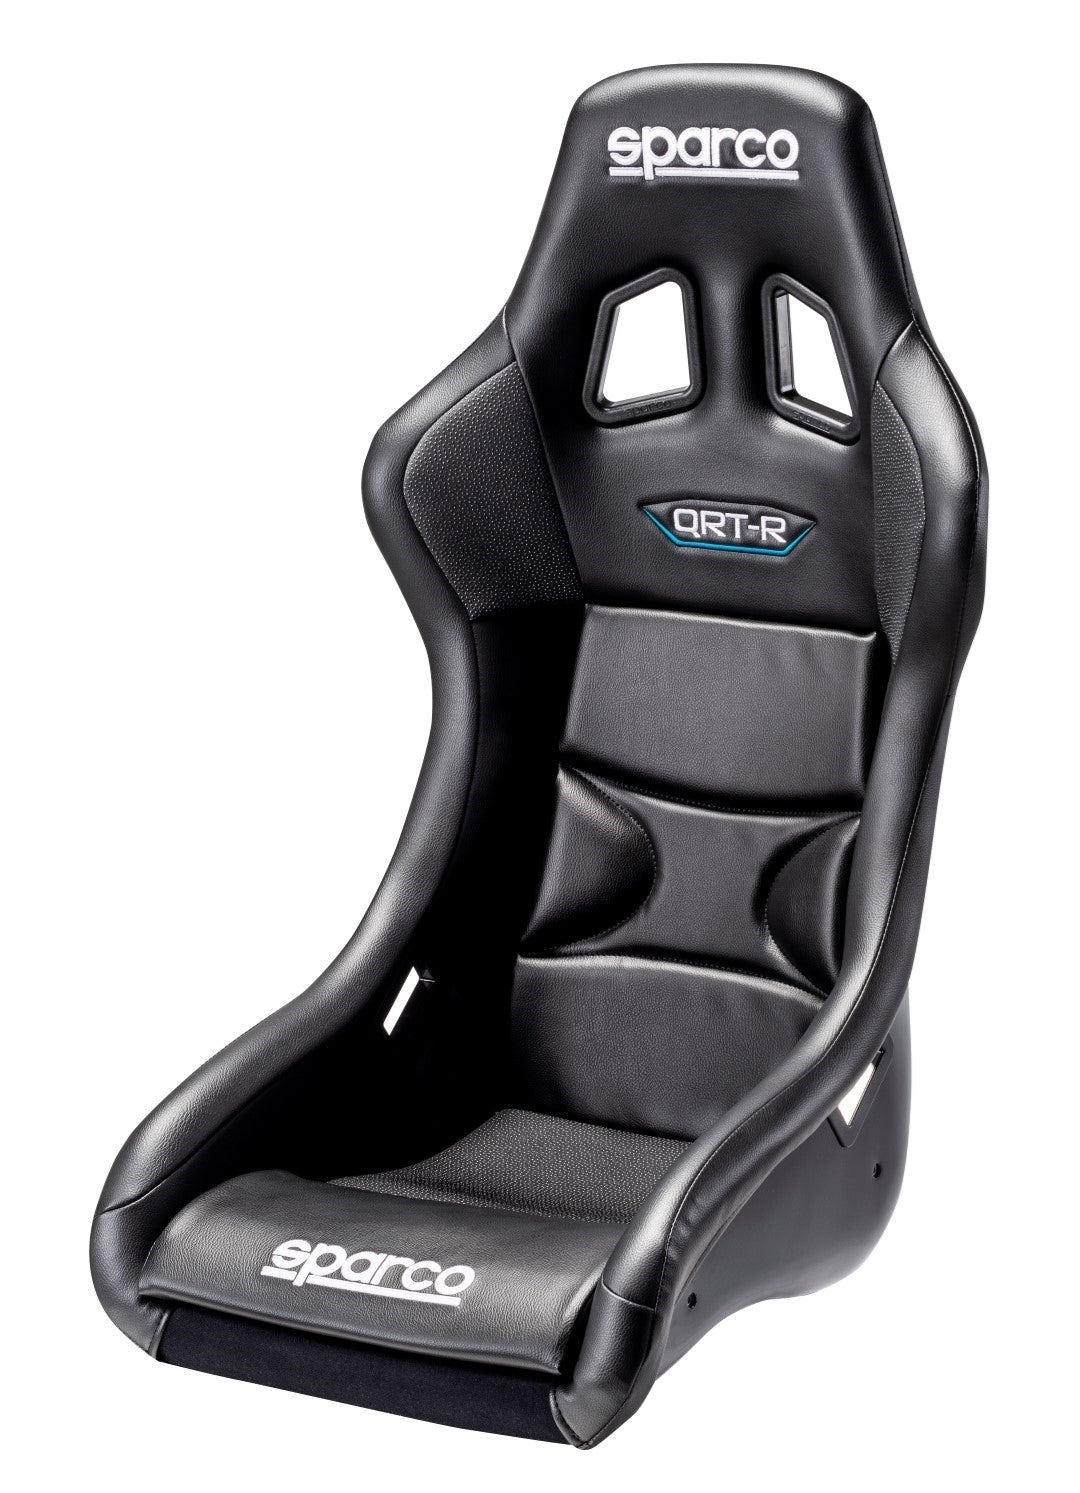 SPARCO COMPETITION SEAT: QRT-R